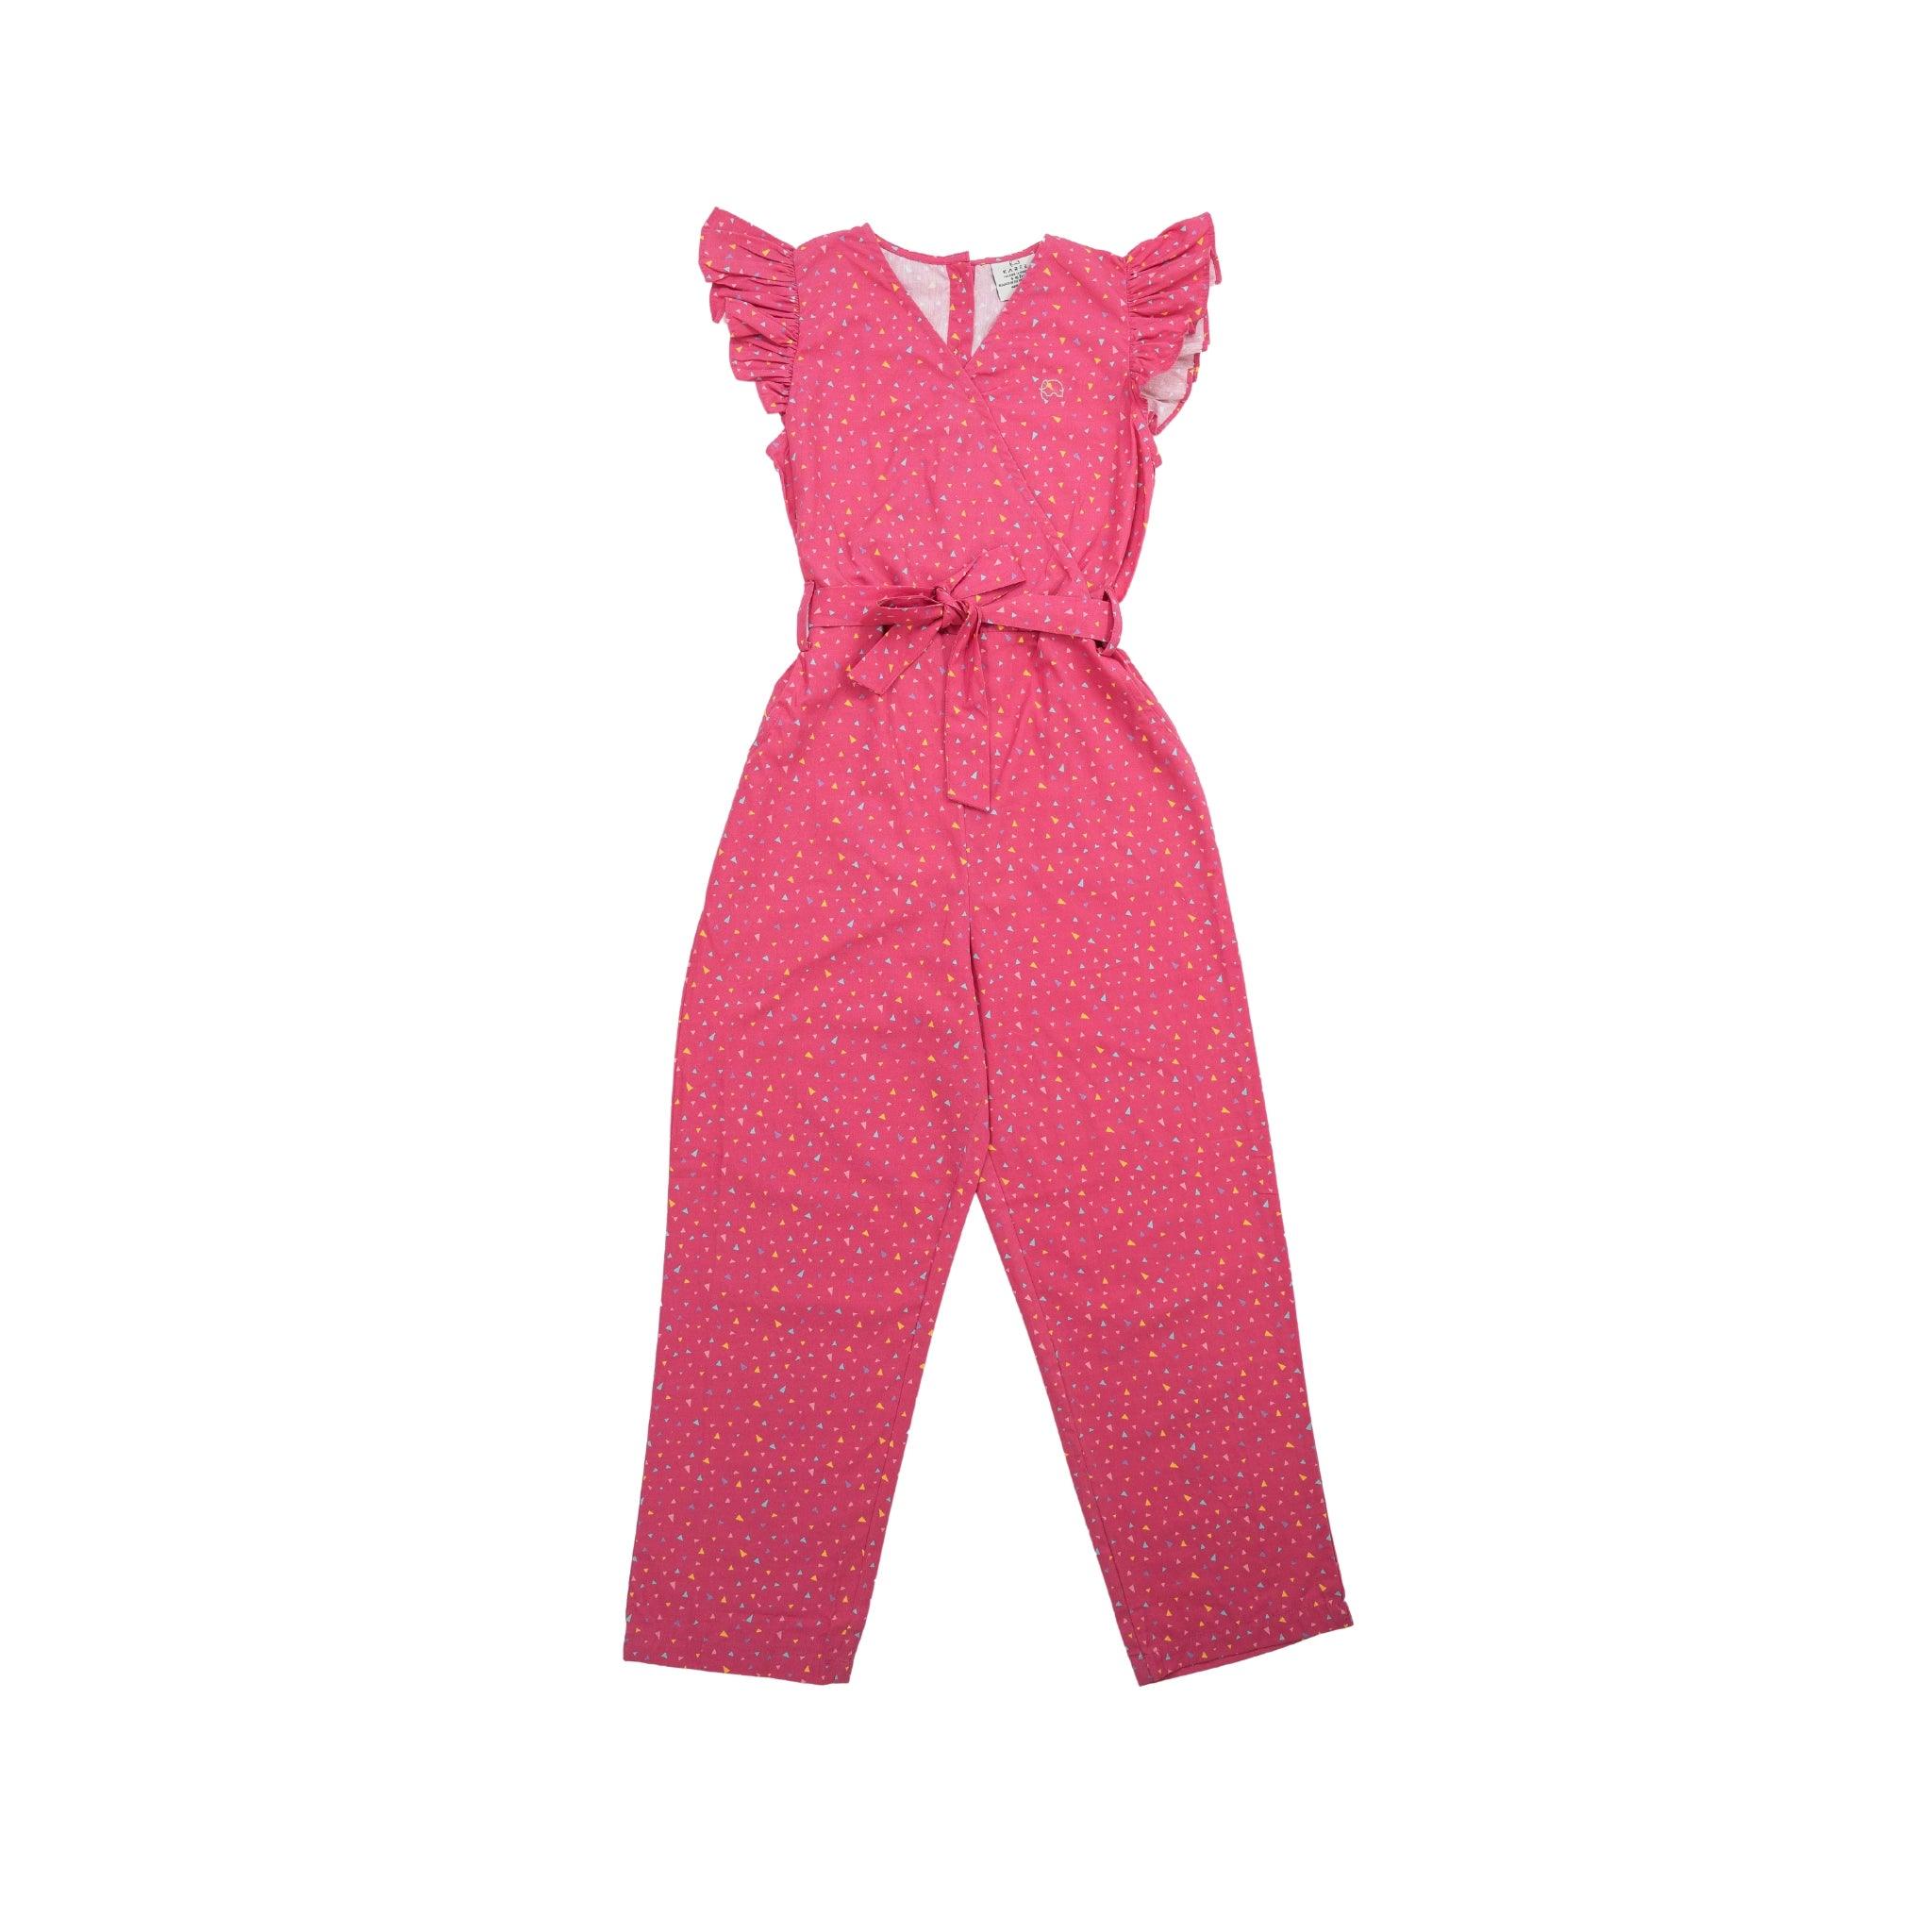 Red Rose cotton jumpsuit in pink with polka dots, featuring ruffled sleeves and a waist tie, displayed against a white background.